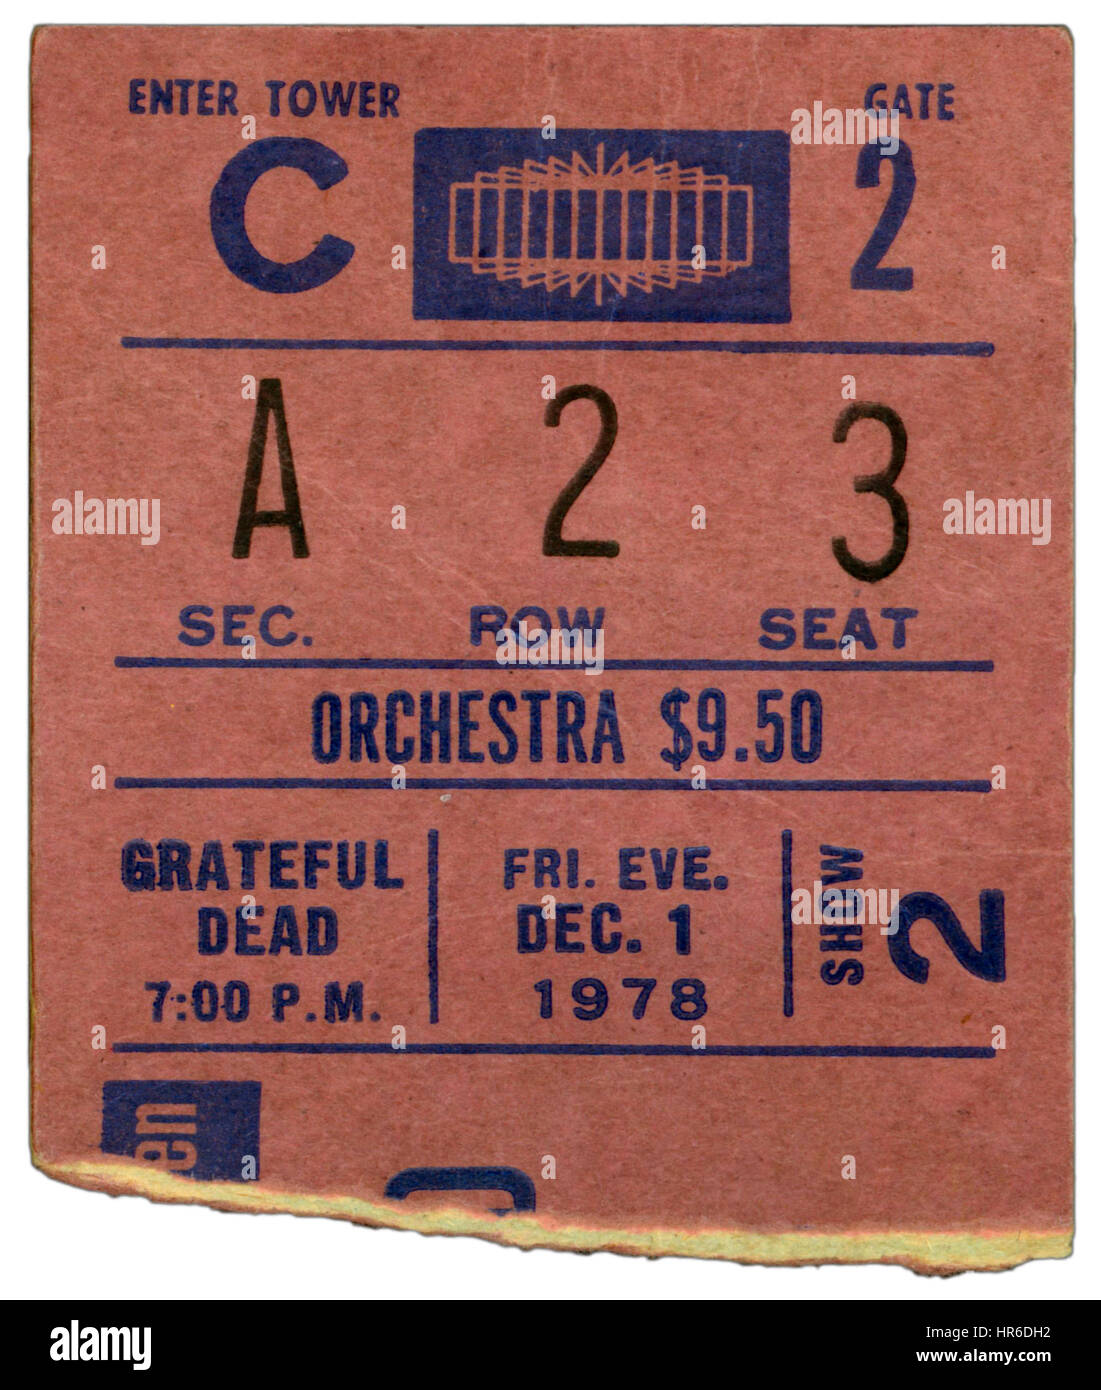 Ticket Stub of The Grateful Dead performing at Madison Square Garden in New York City on December 1st, 1978 Stock Photo